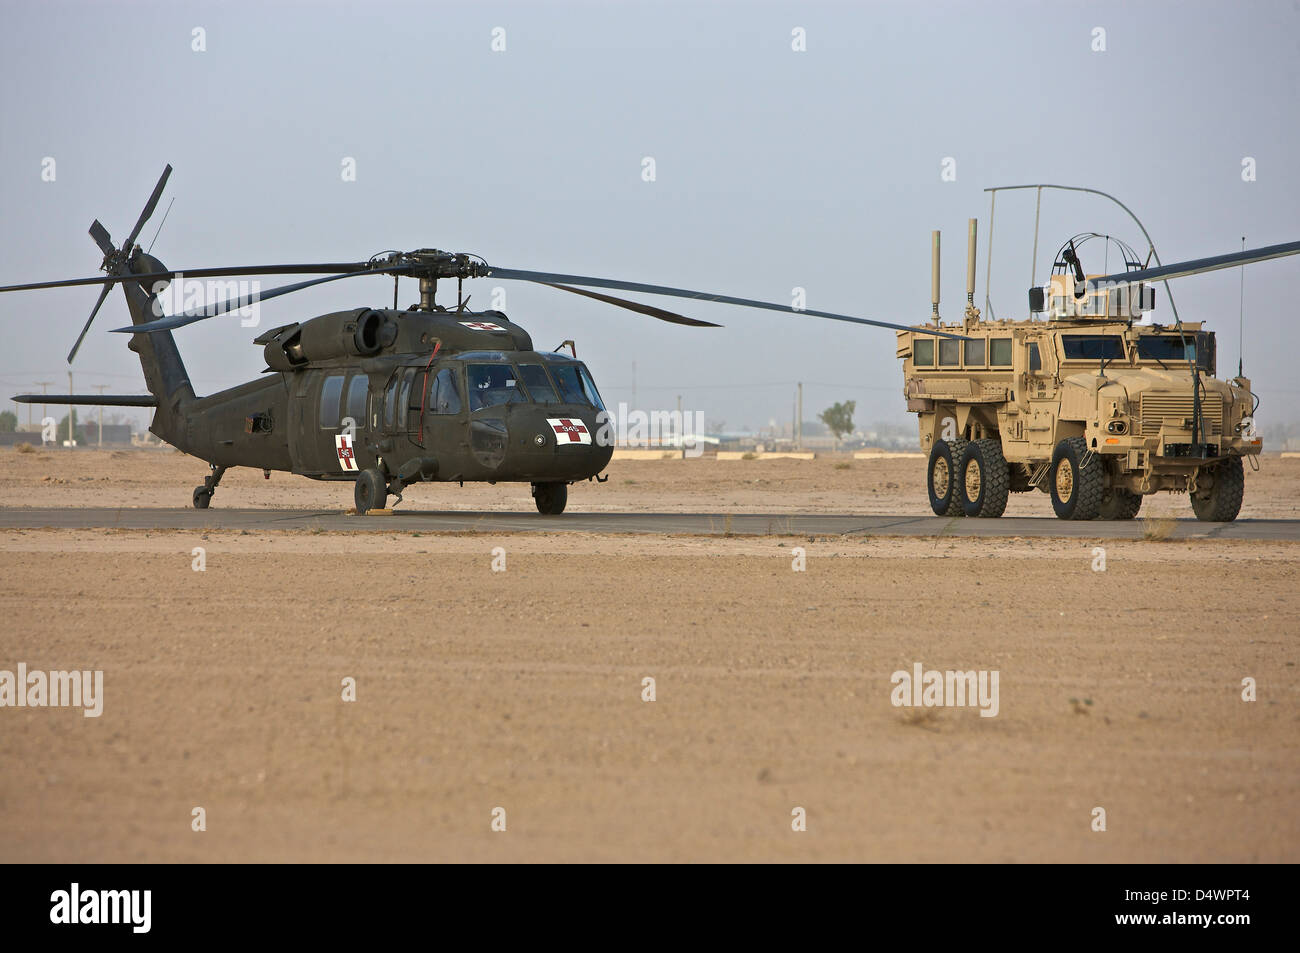 A U.S. Army medevac UH-60 Black Hawk helicopter and a RG-33 MRAP vehicle at COB Speicher, Tikrit, Iraq. Stock Photo